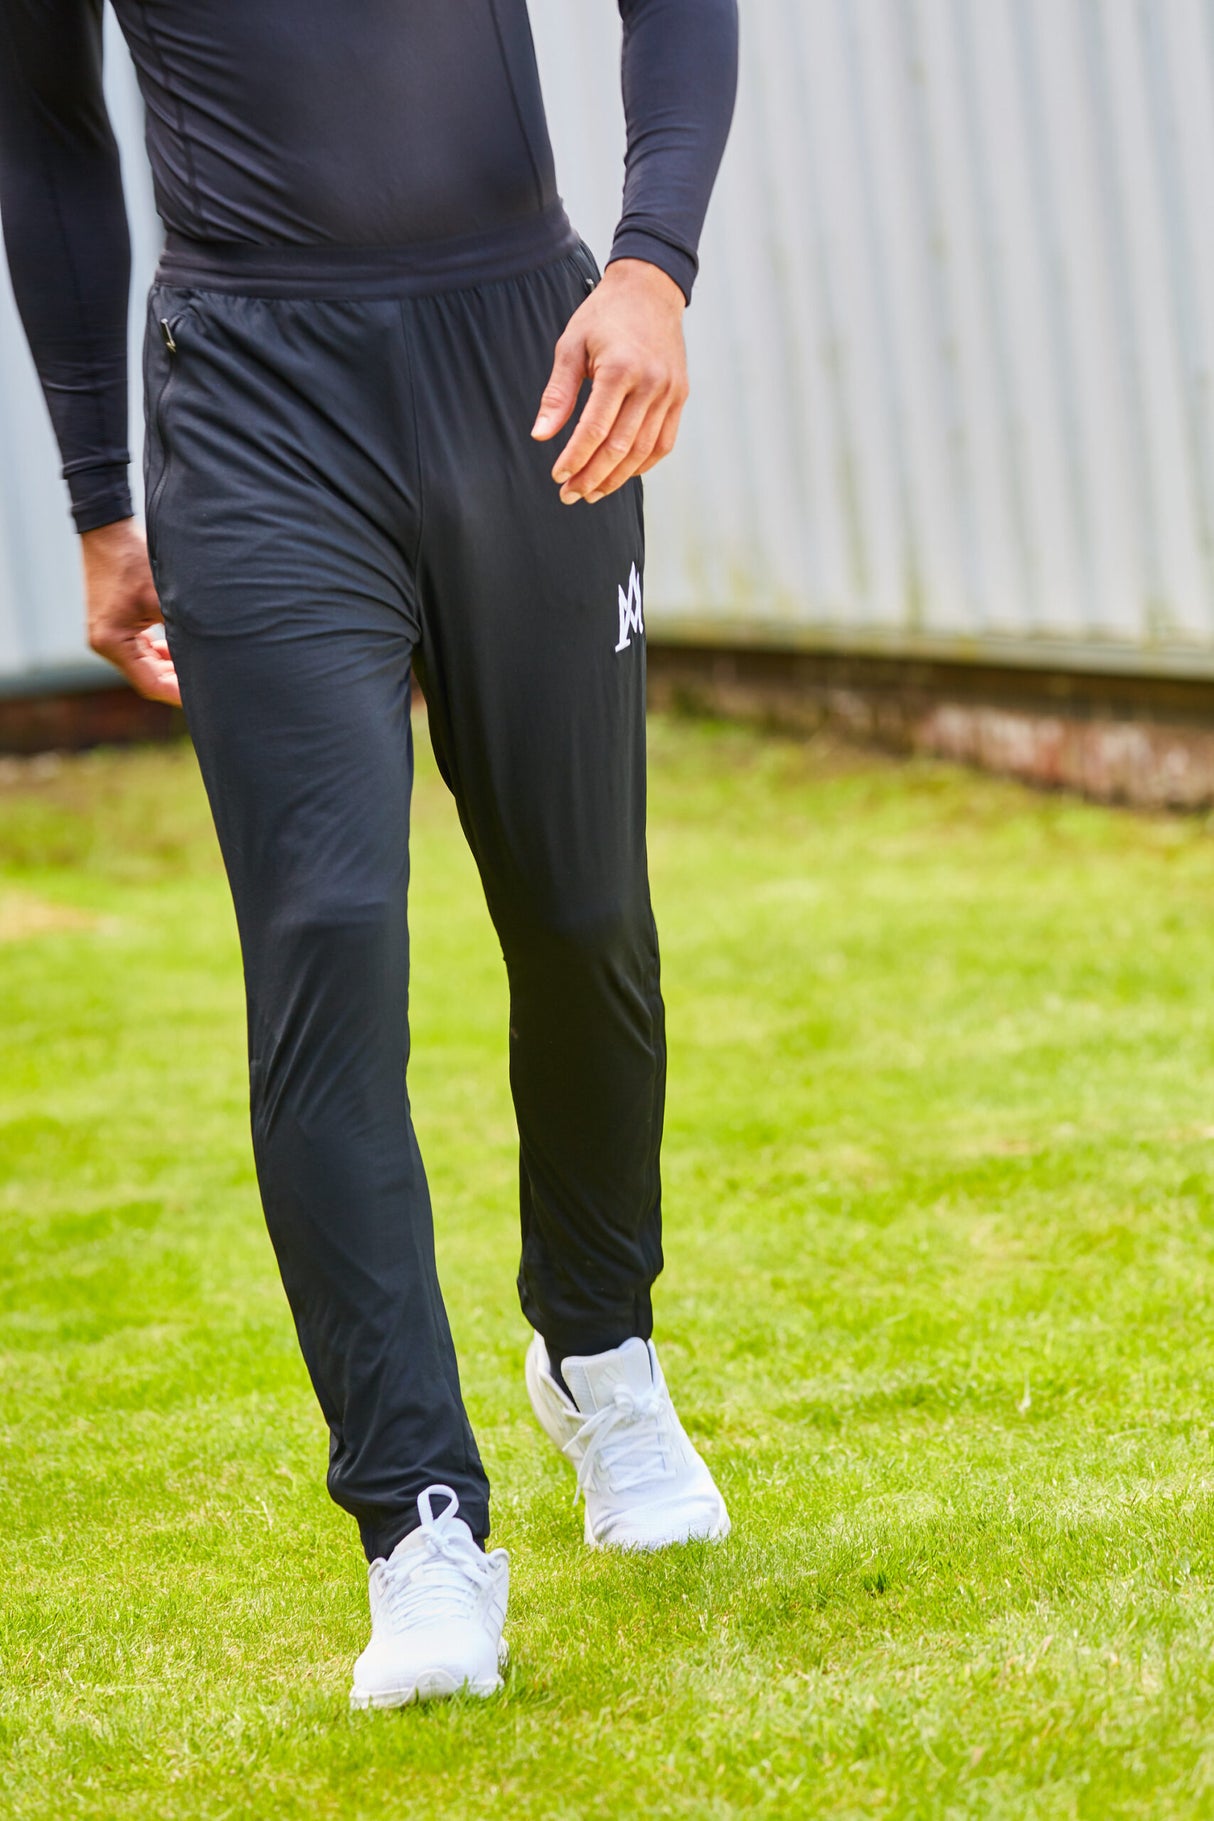 Chadwicks 903 - Eclipse Tapered Fit Training Pant